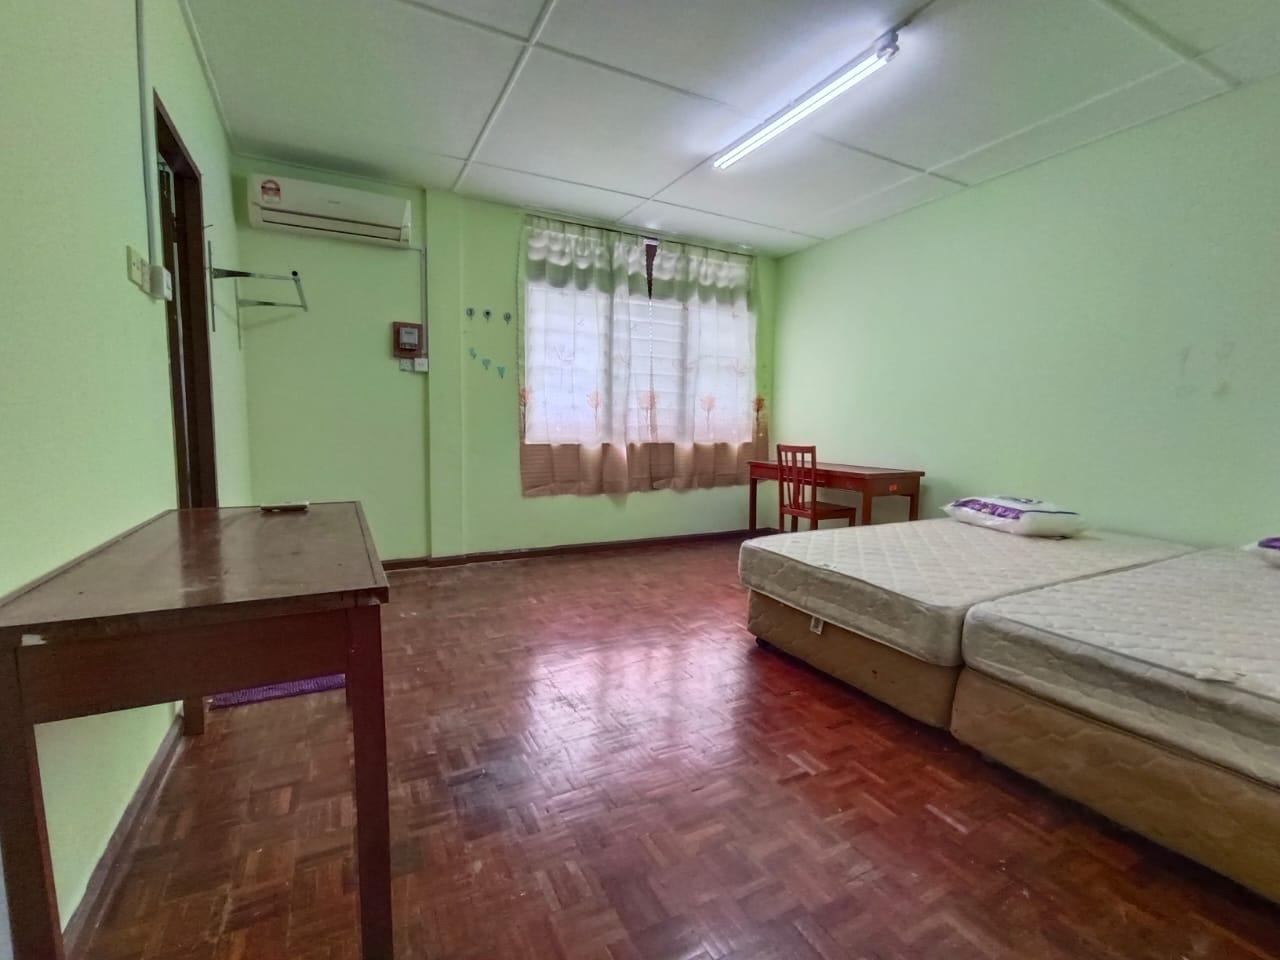 Master Room for Rent! Located at Jalan Wan Alwi